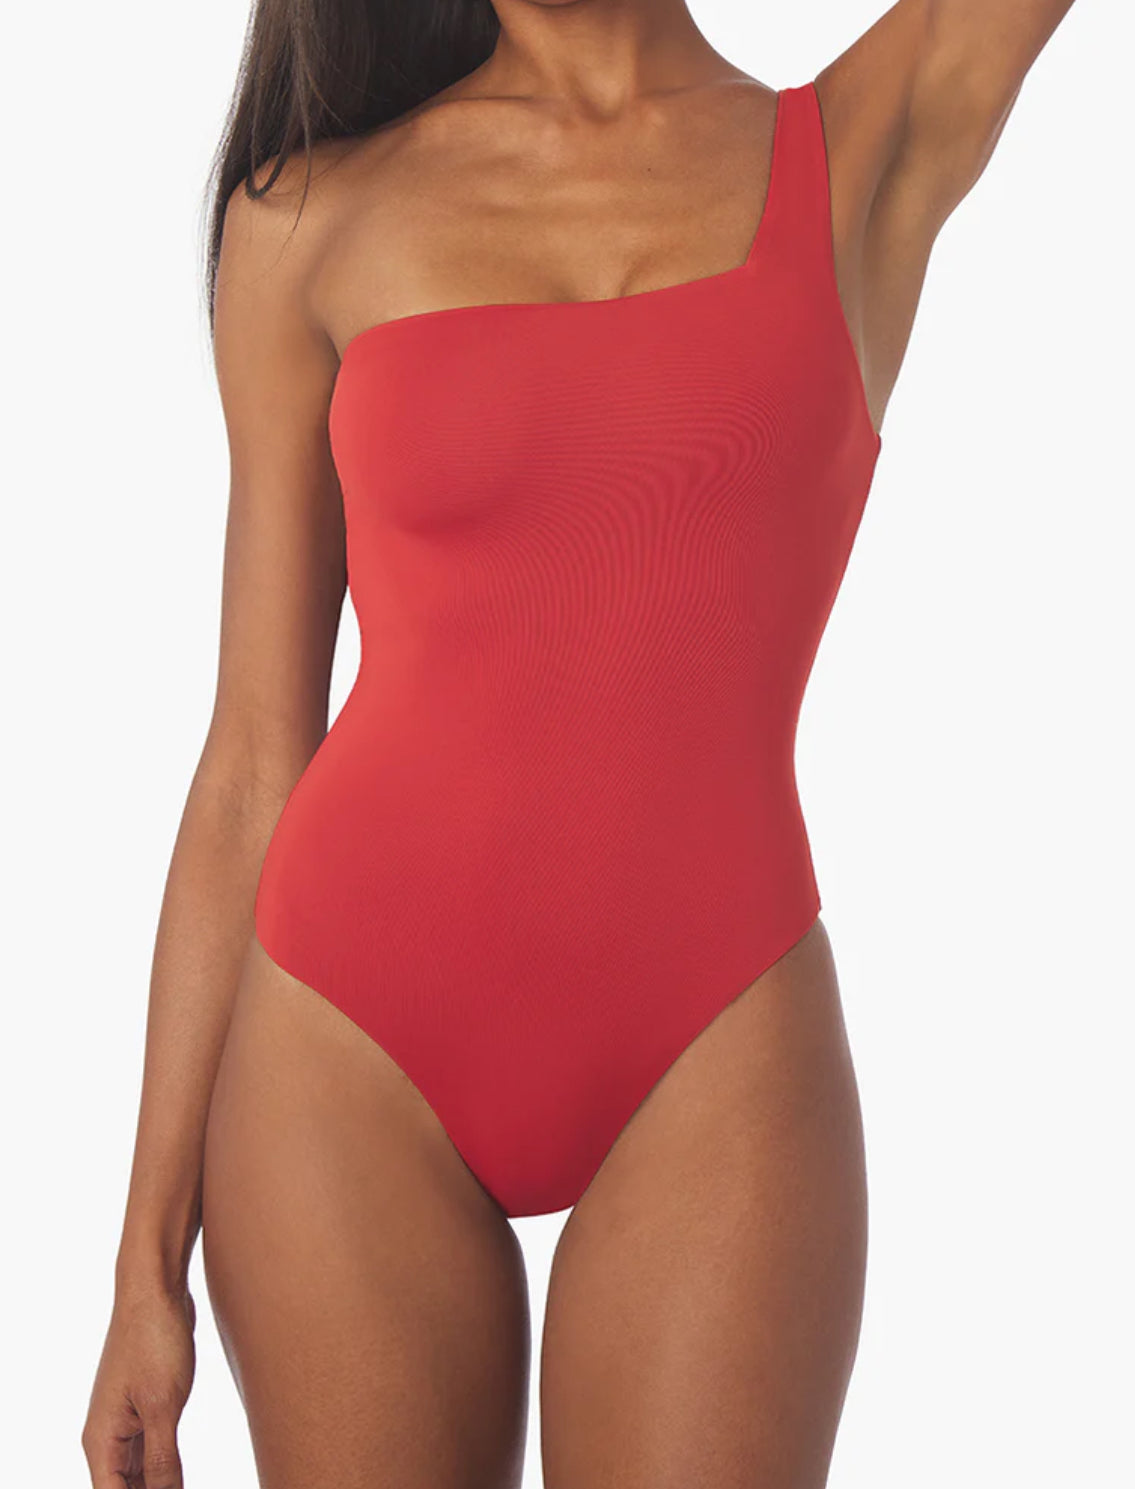 We wore what - one shoulder one piece bathing suit